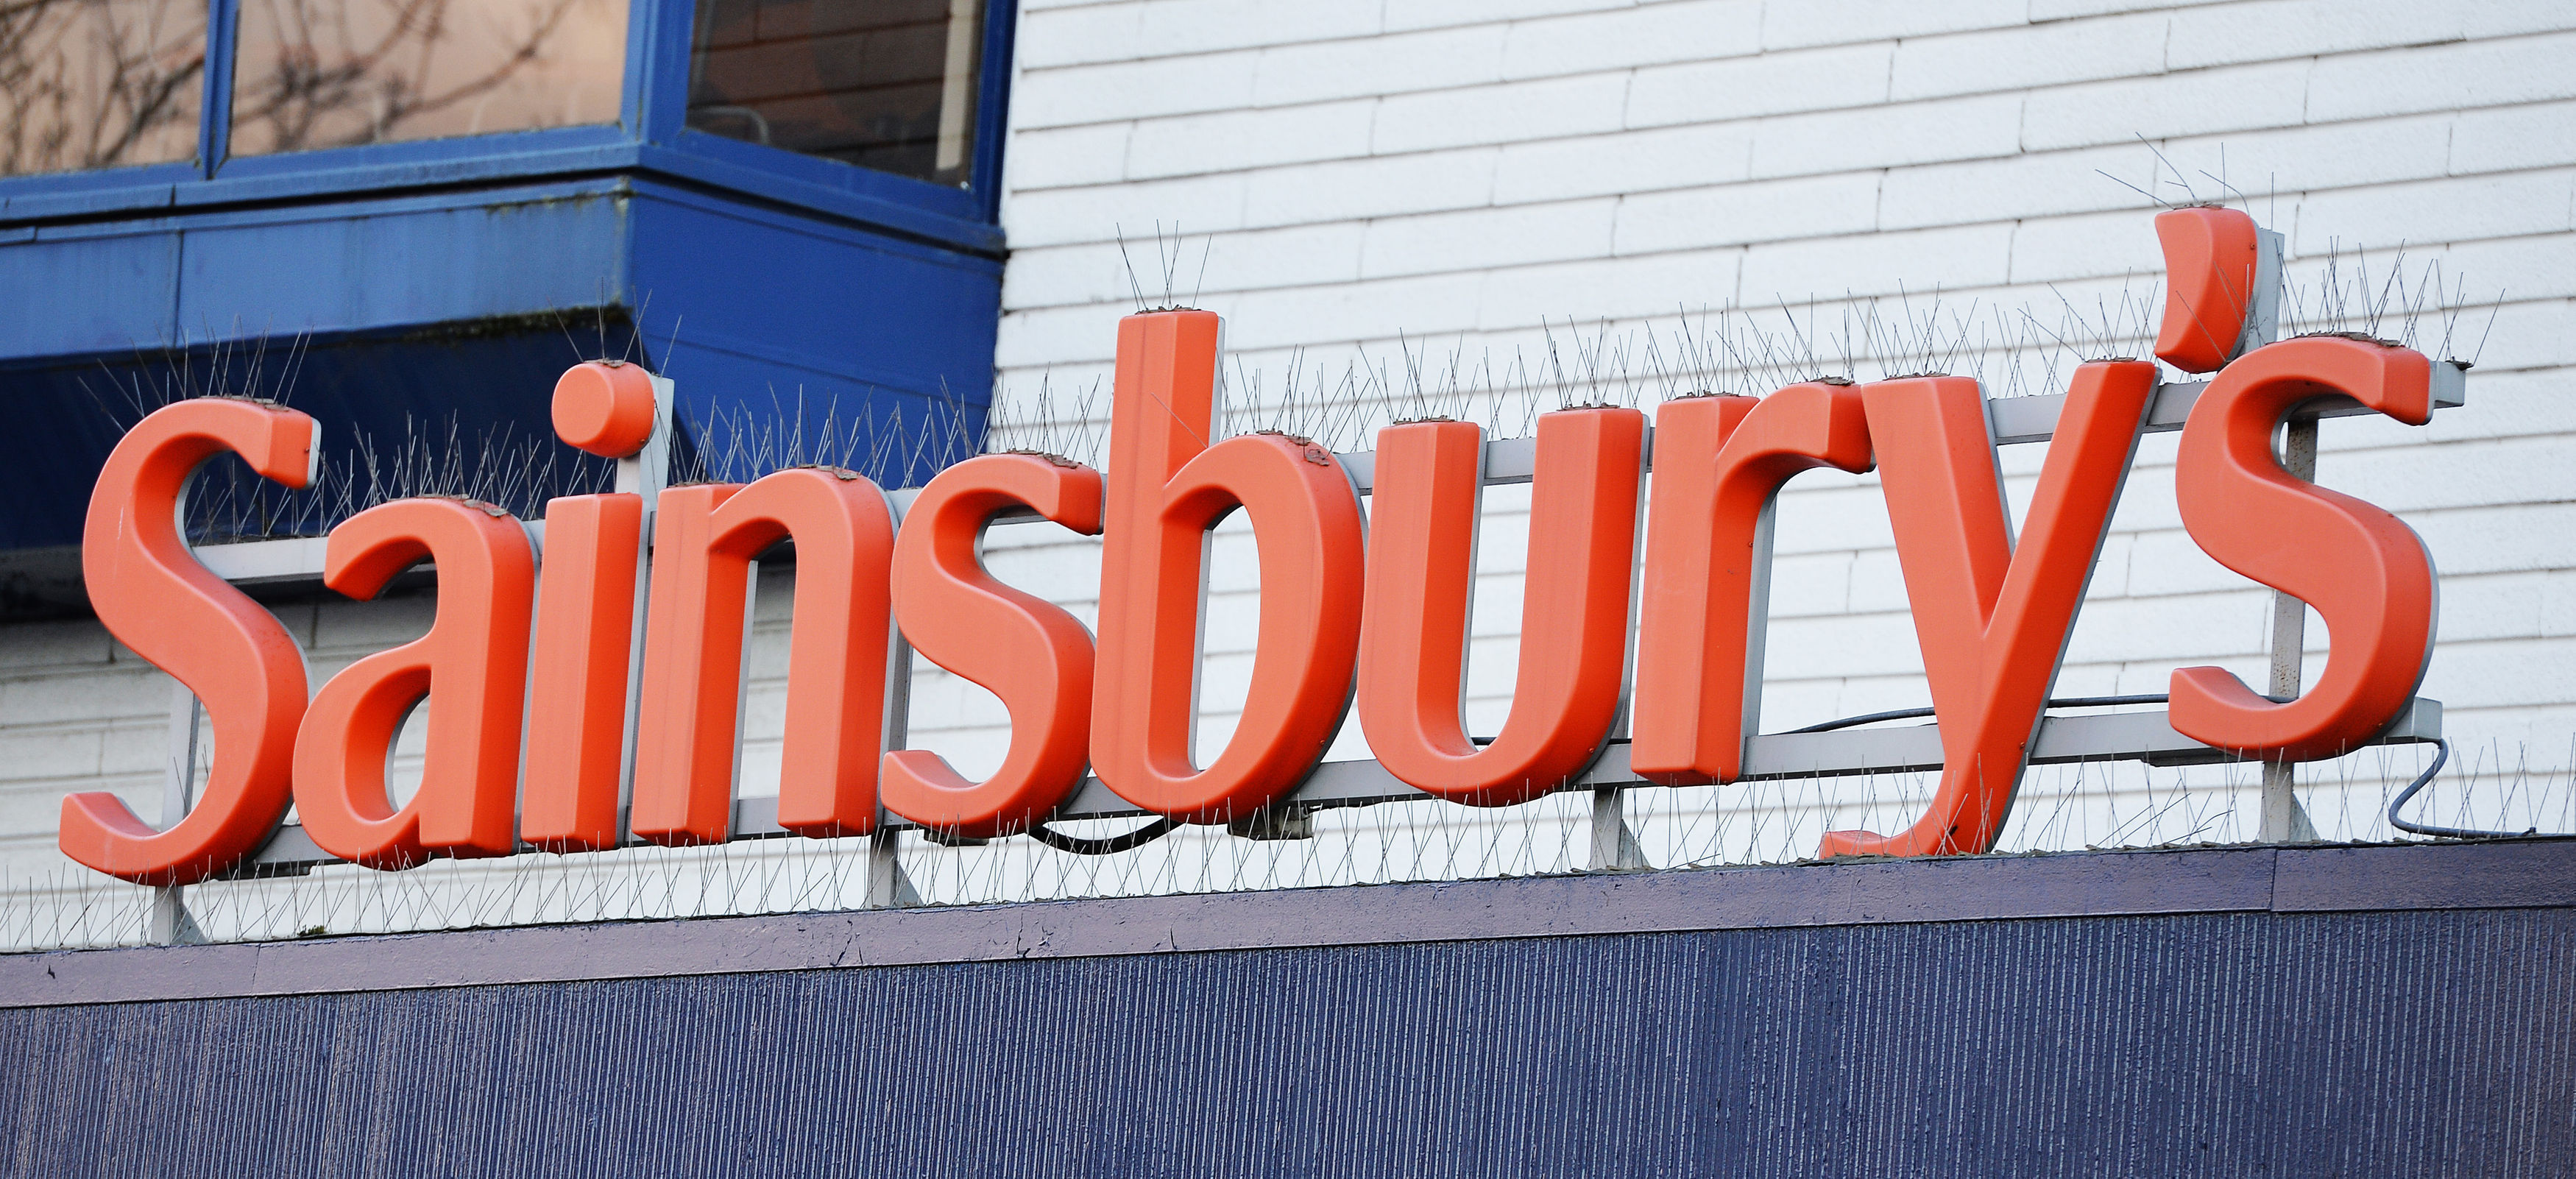 A photo of a Sainsbury's sign